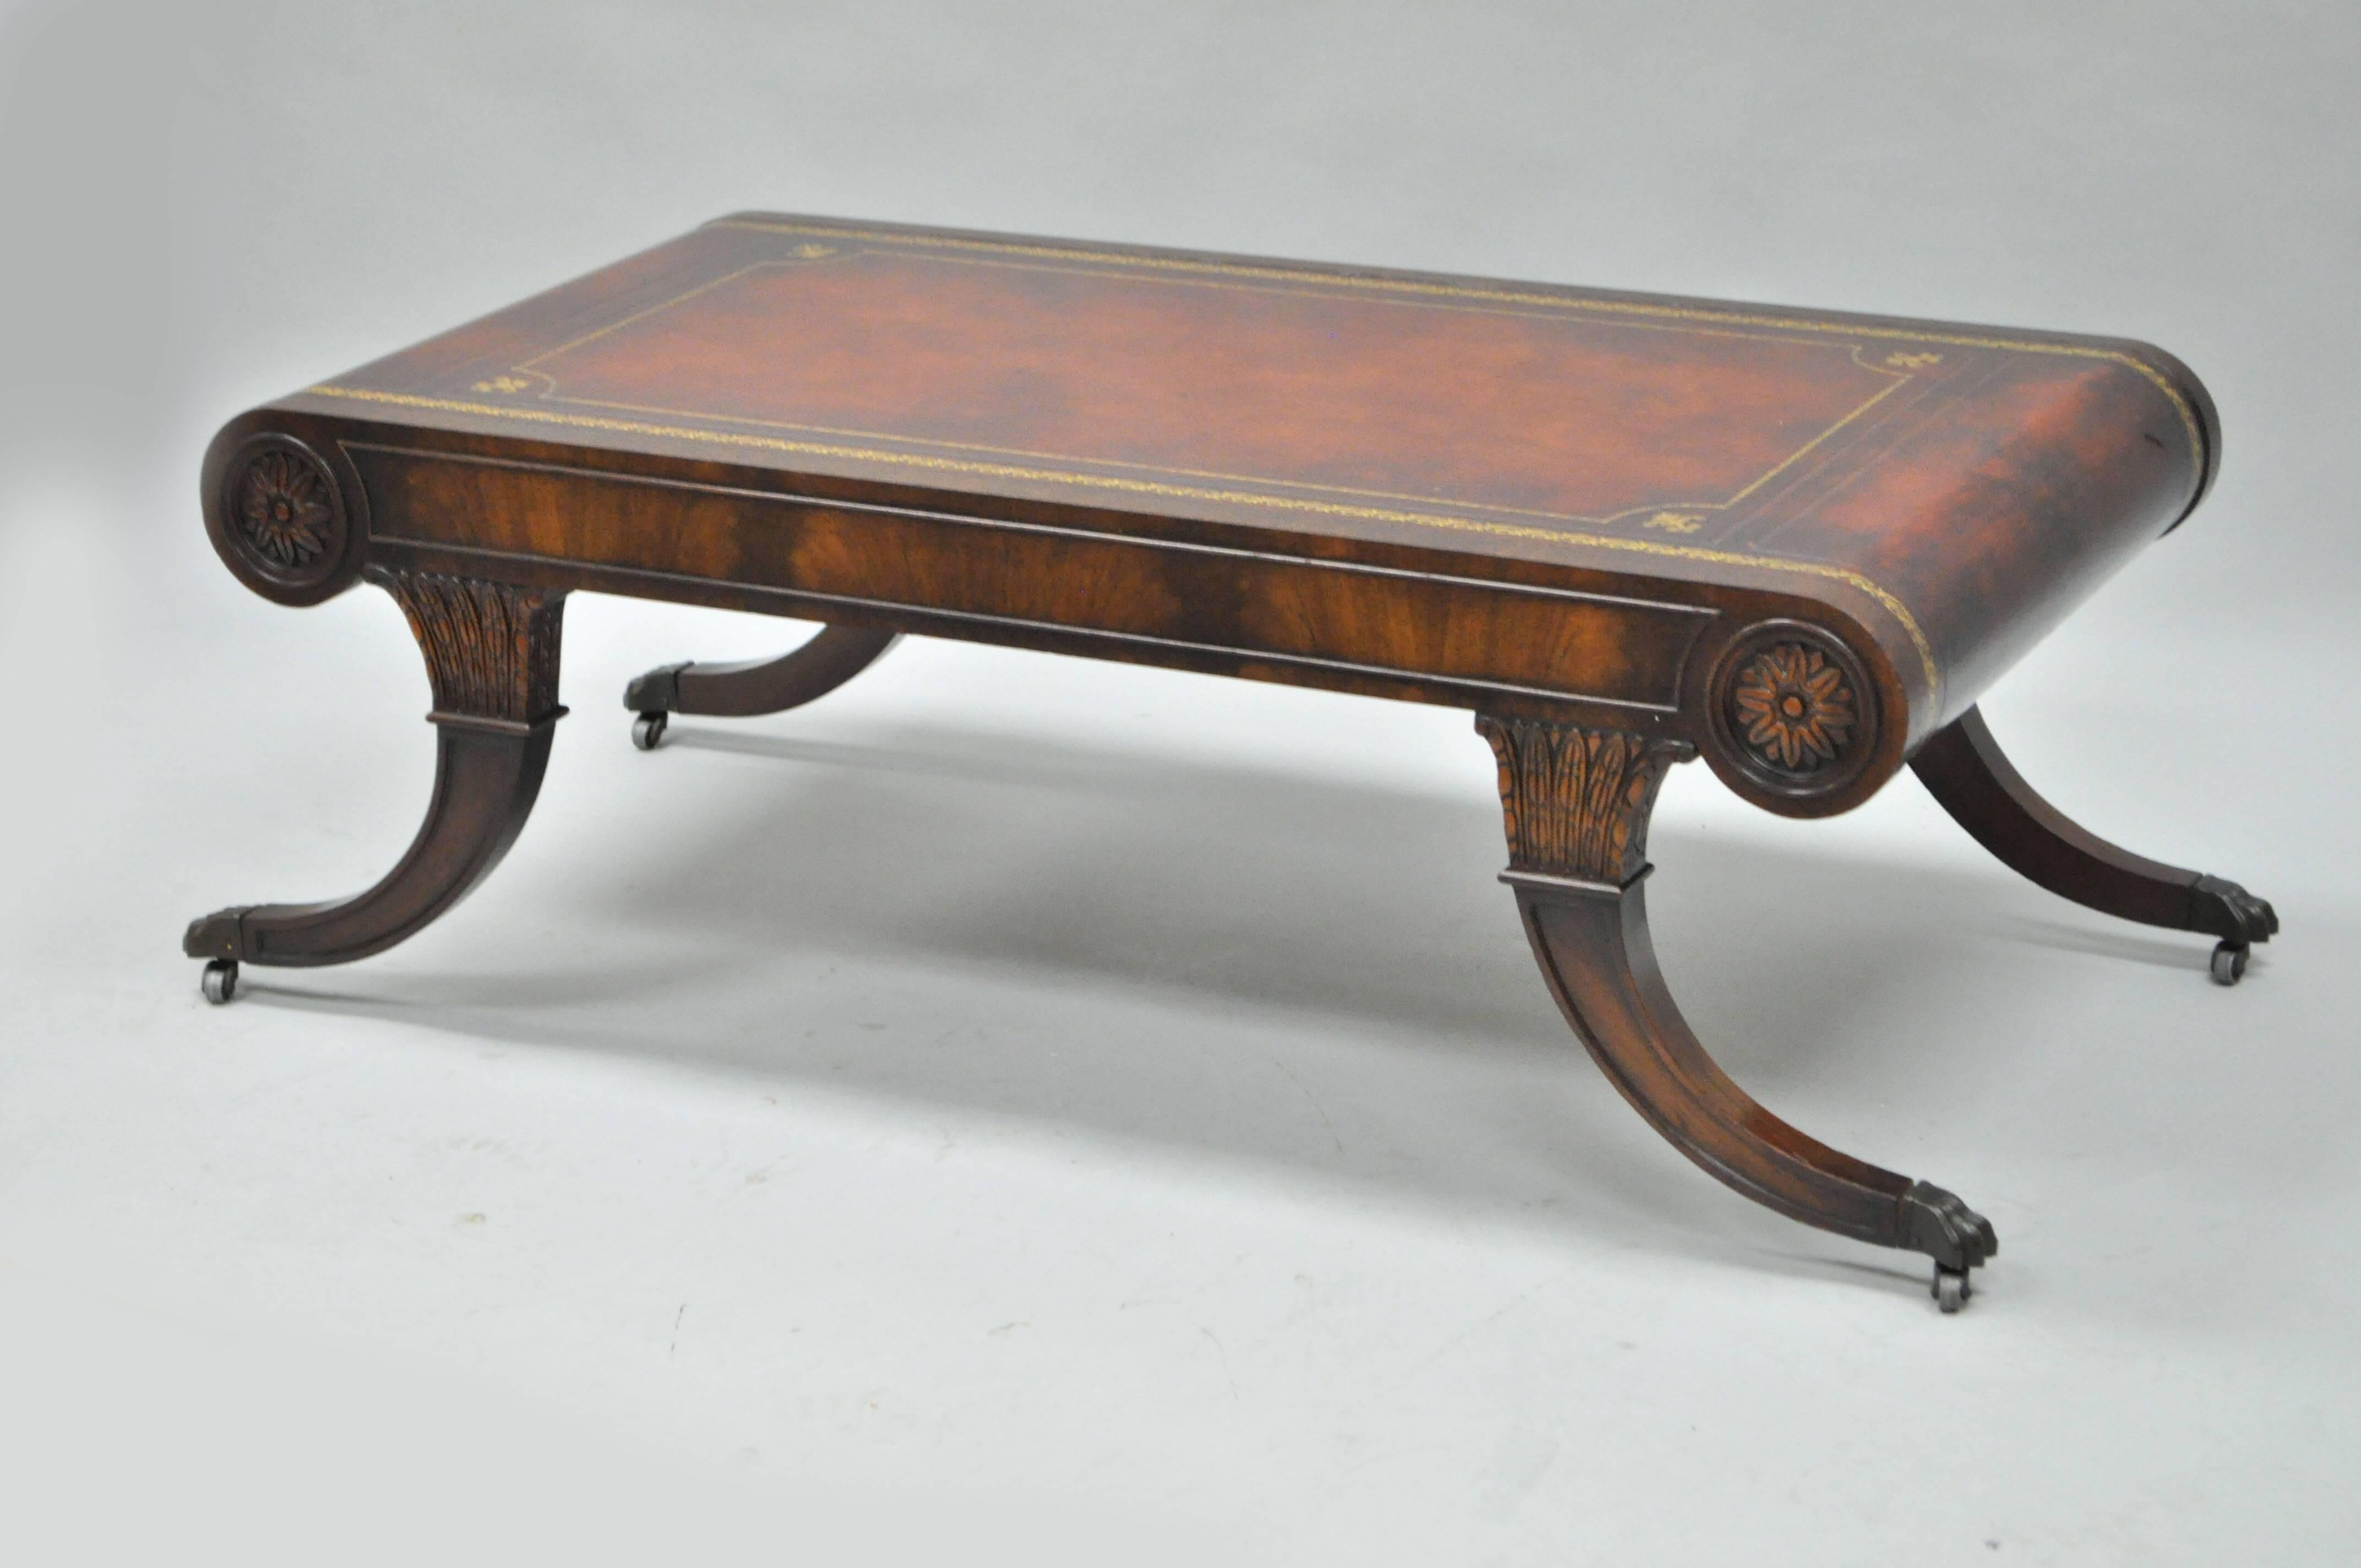 Rare vintage Regency style tooled leather and crotch mahogany coffee table by Weiman. Item features a rolled edge burgundy tooled leather top with gold gilt detailing, saber legs raised on rolling casters and brass claw feet, figured crotch mahogany